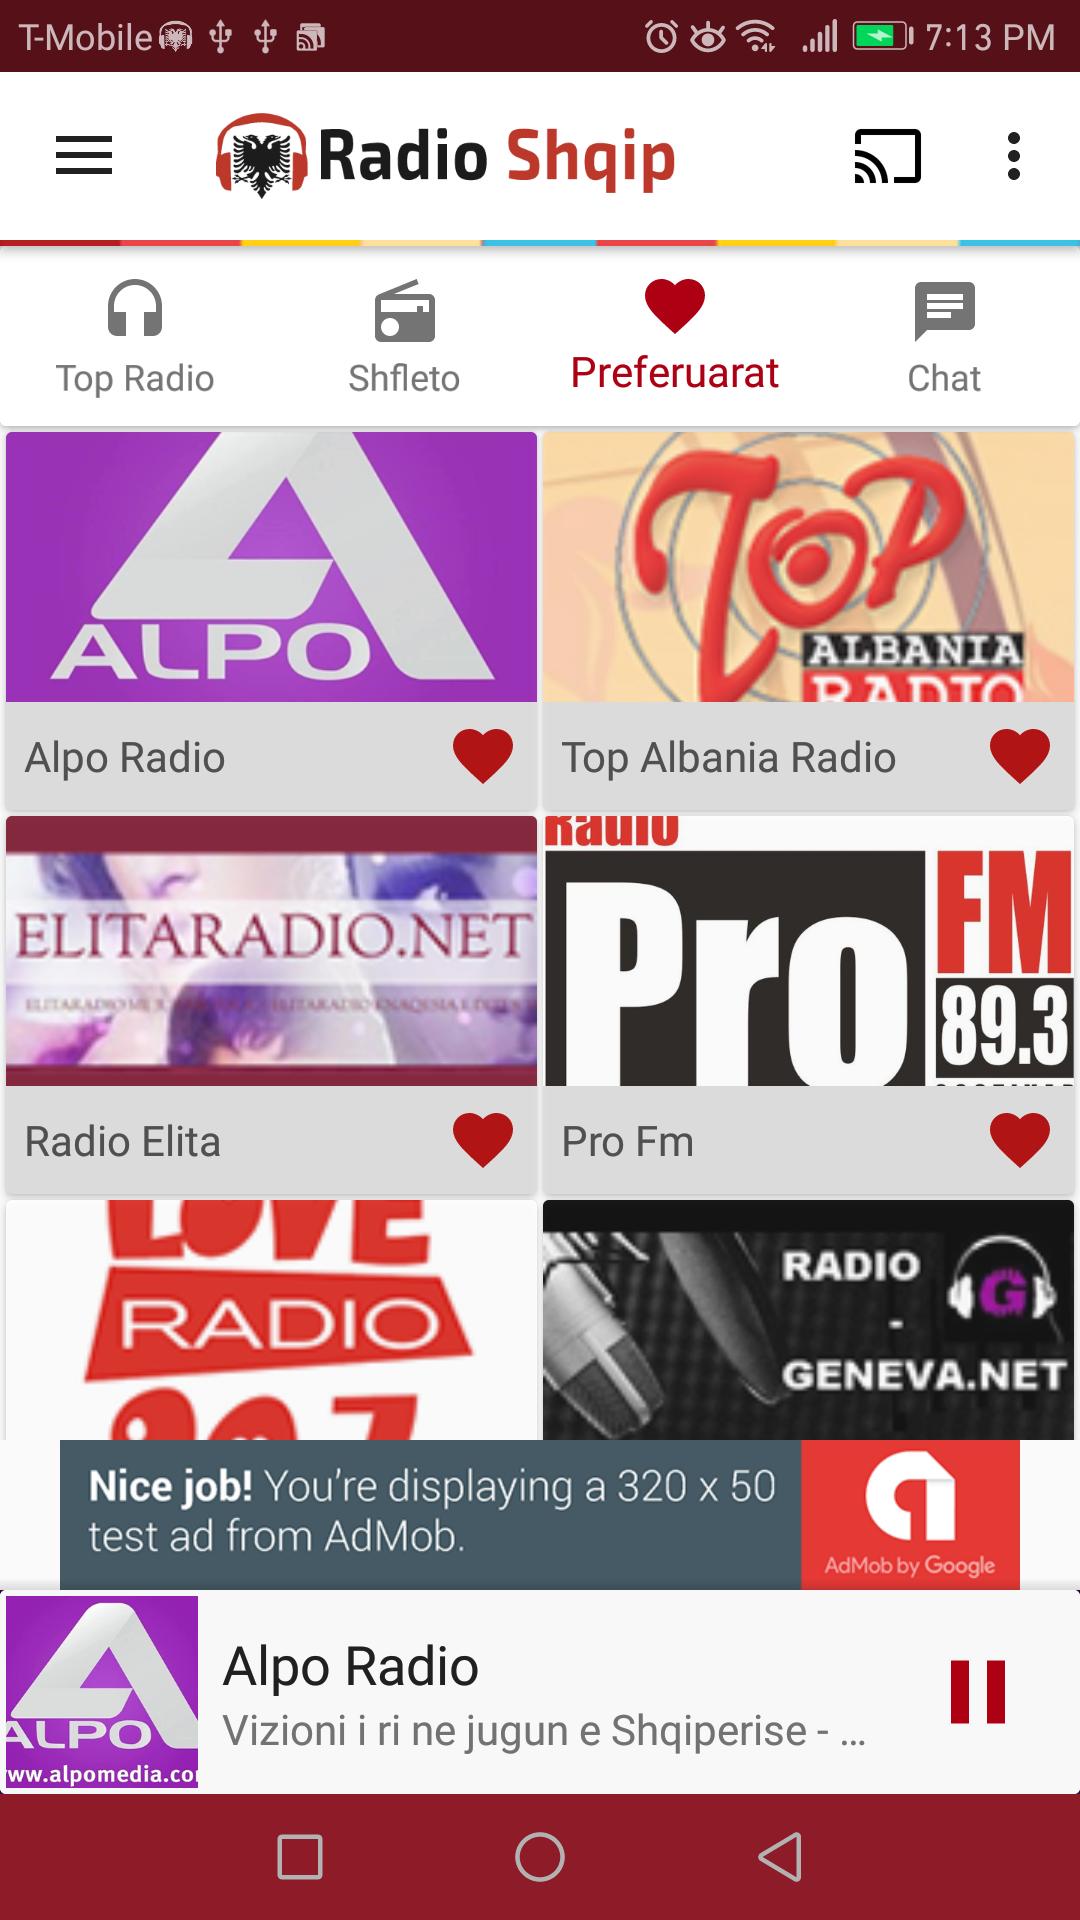 Radio Shqip for Android - APK Download